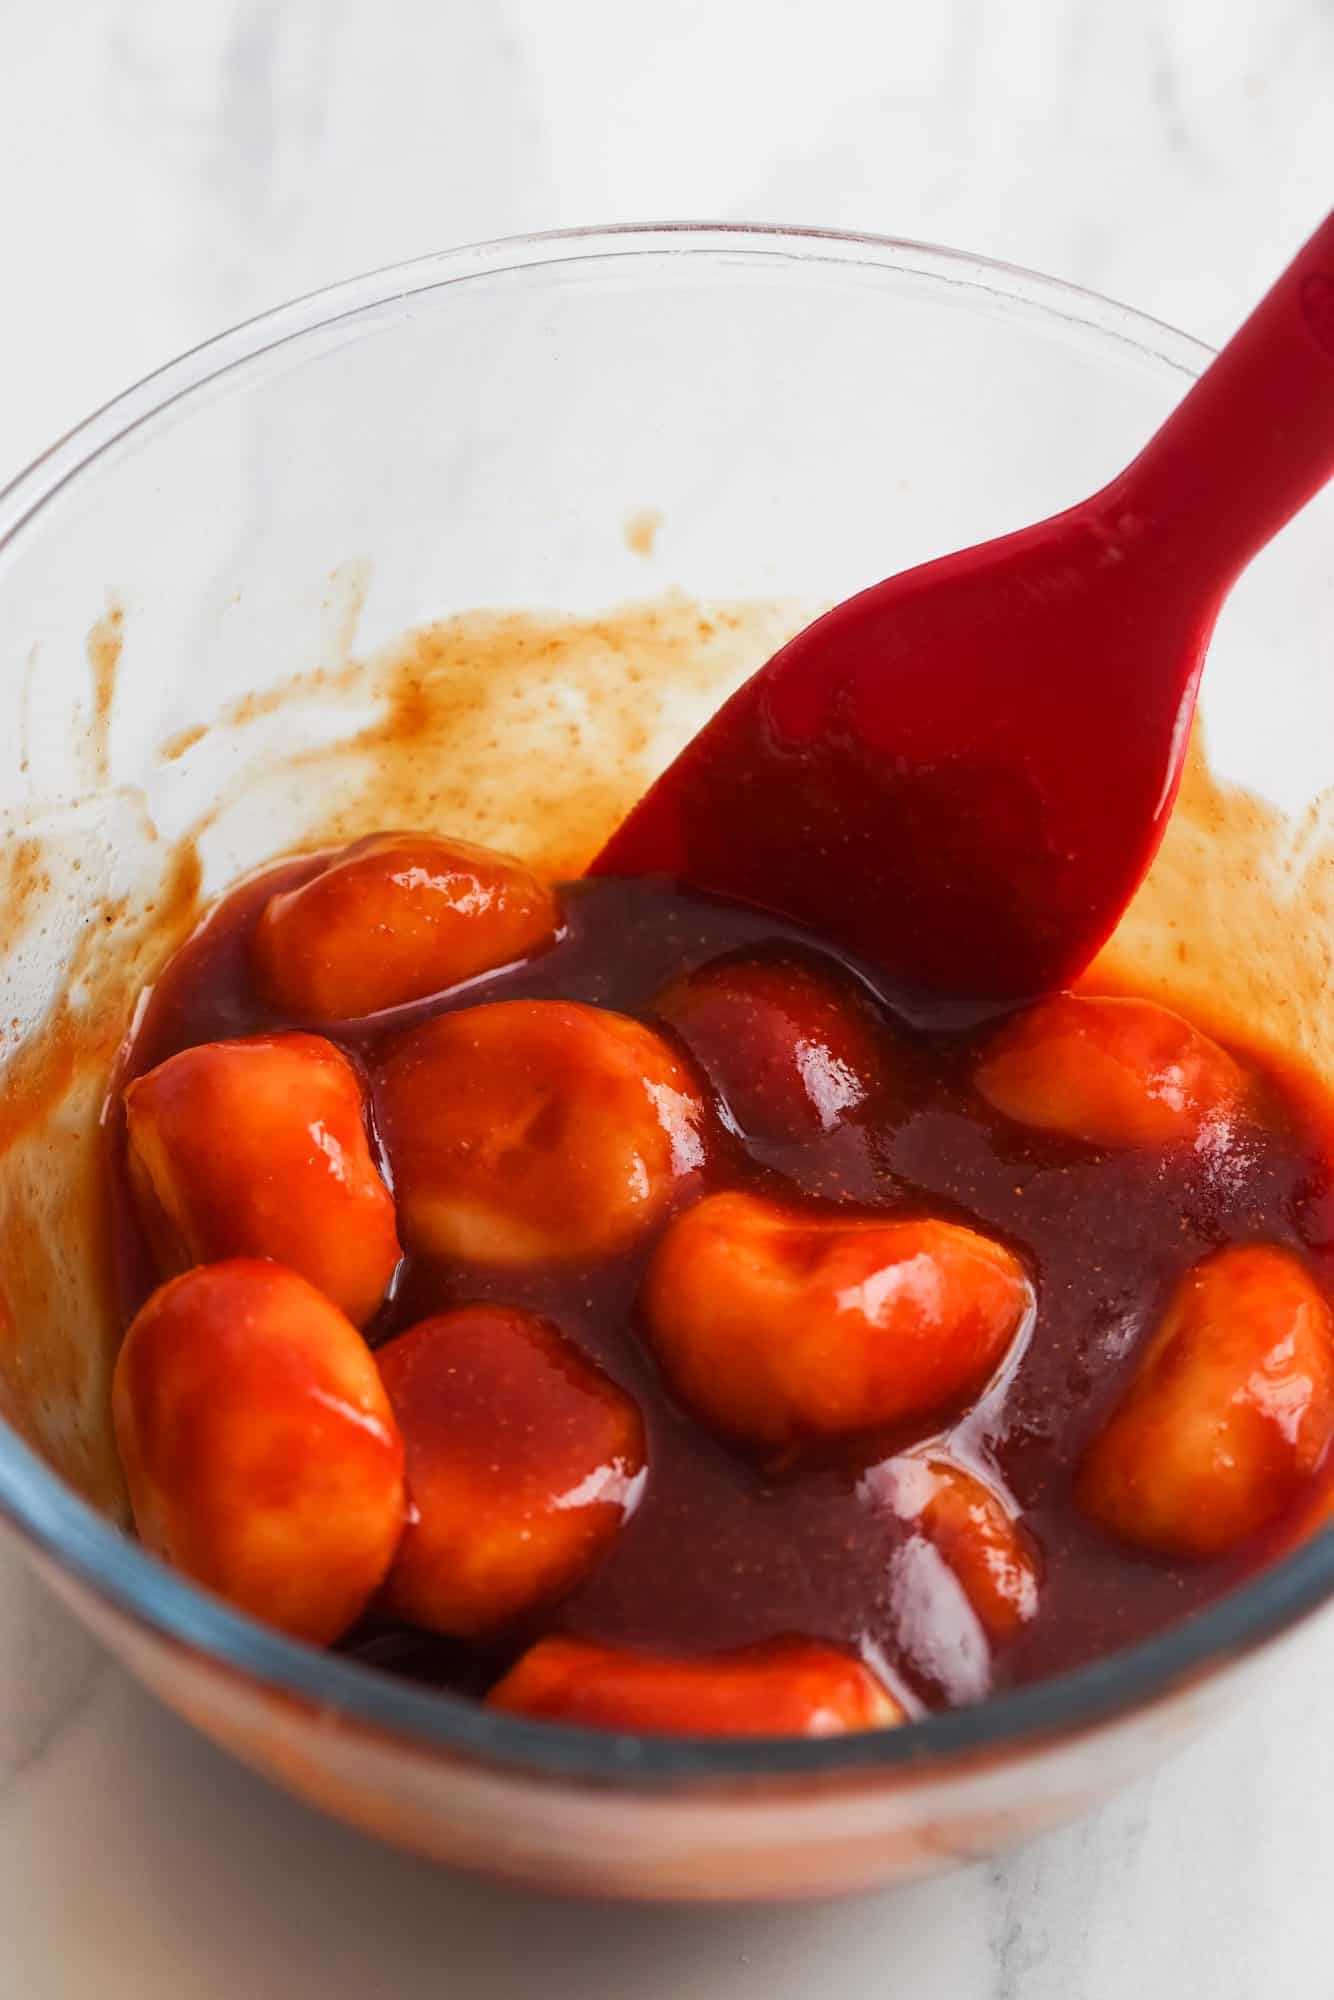 water chestnuts marinating in a red glaze. A red spoon is stirring them in a glass bowl. 